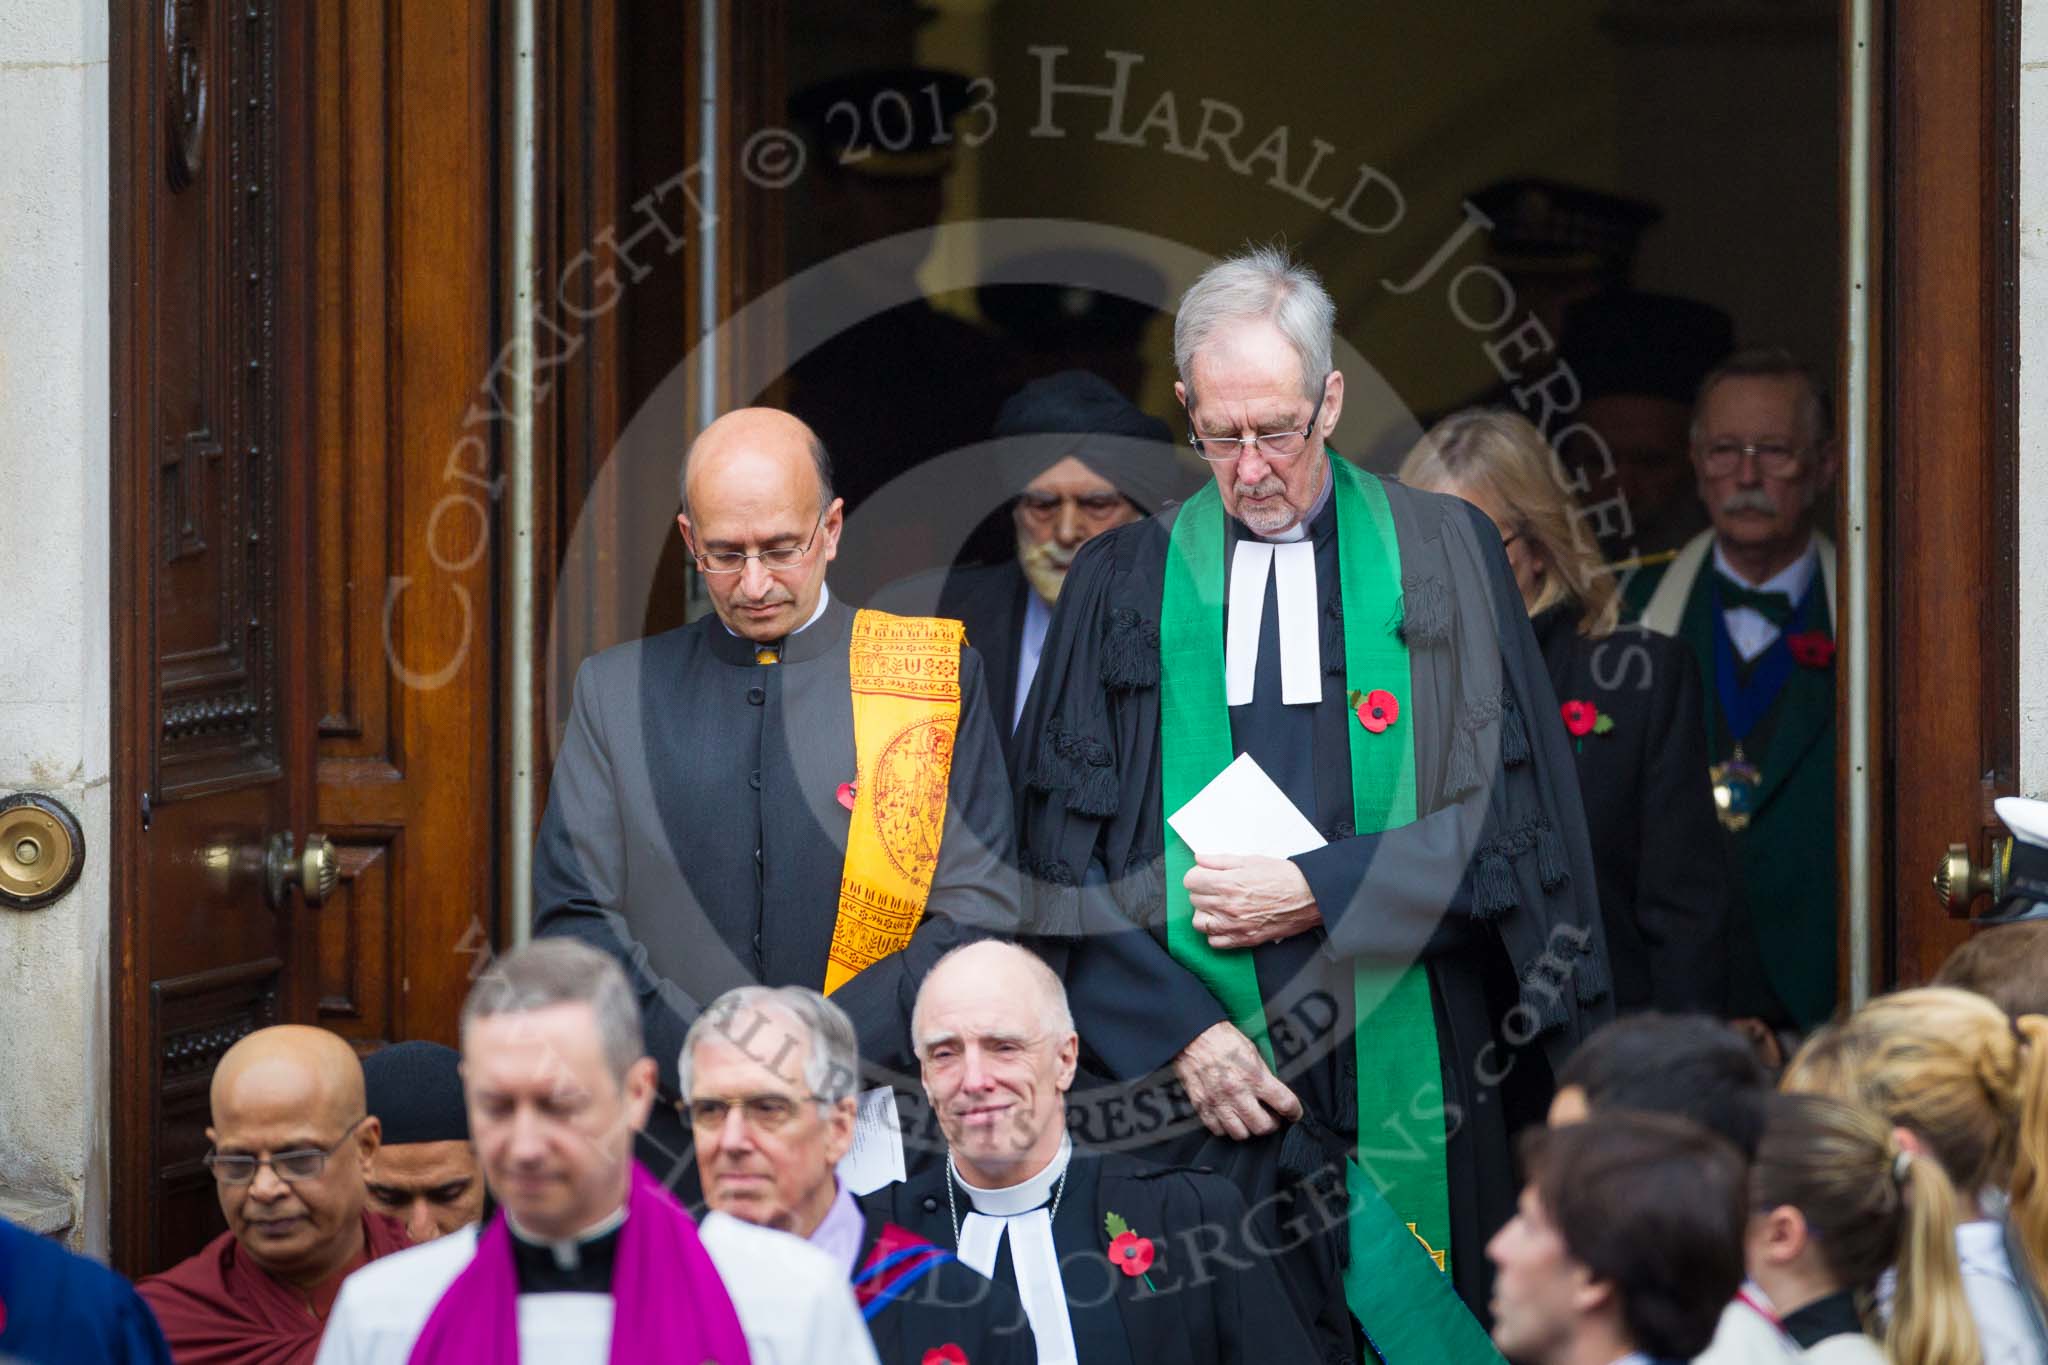 Remembrance Sunday at the Cenotaph 2015: The members of the faith communities leaving the Foreign- and Commonwealth Office. Image #107, 08 November 2015 10:56 Whitehall, London, UK